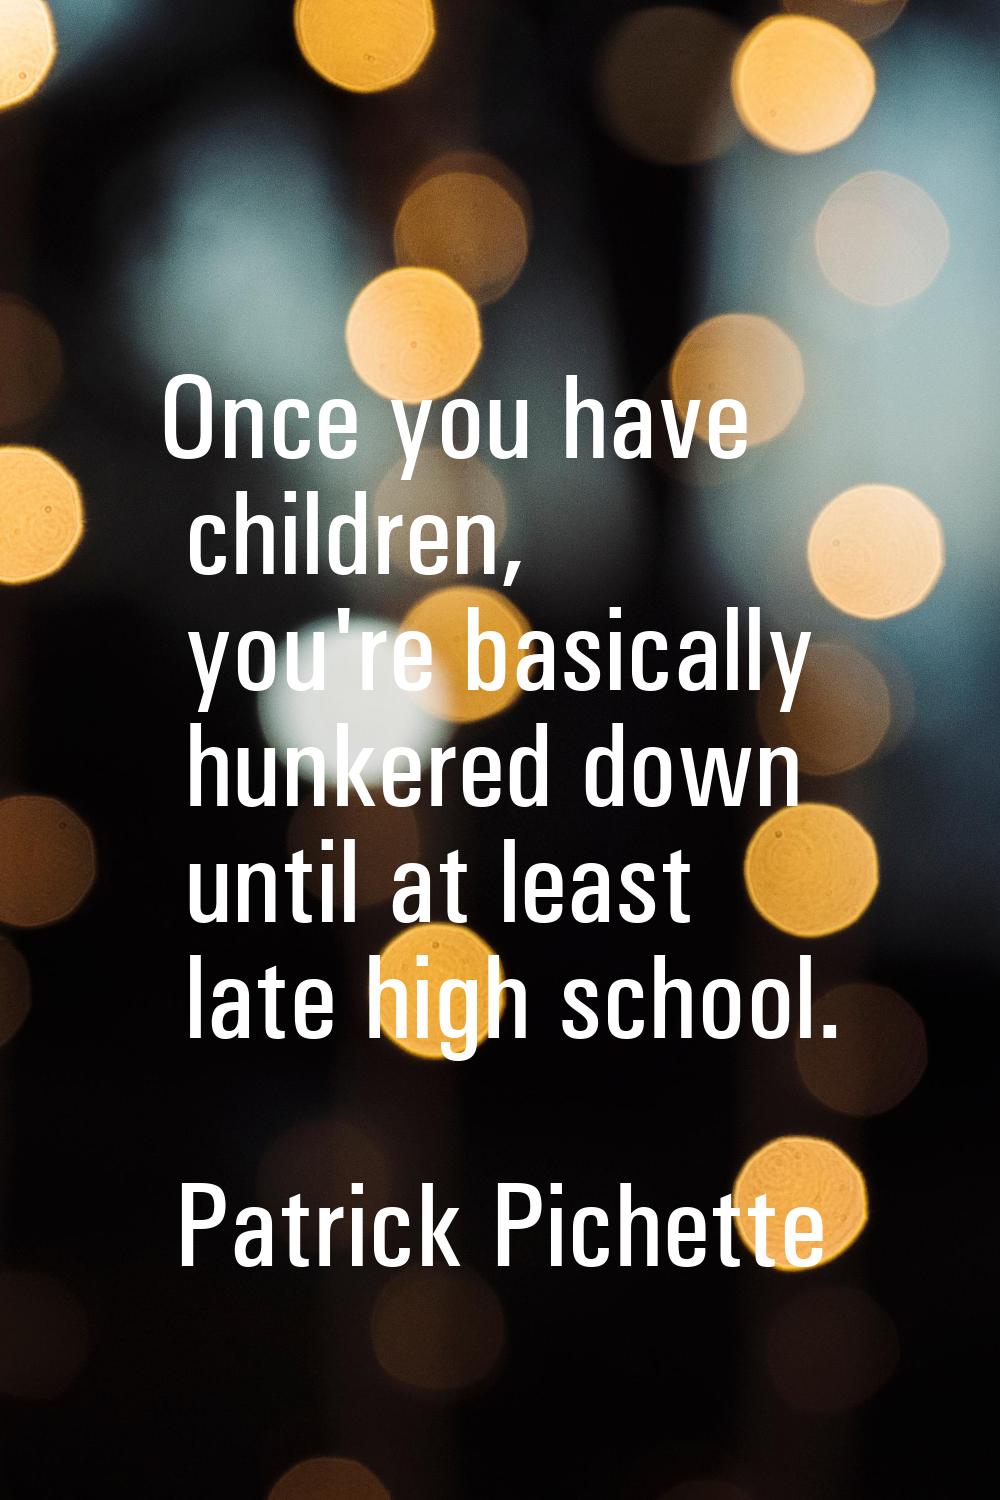 Once you have children, you're basically hunkered down until at least late high school.